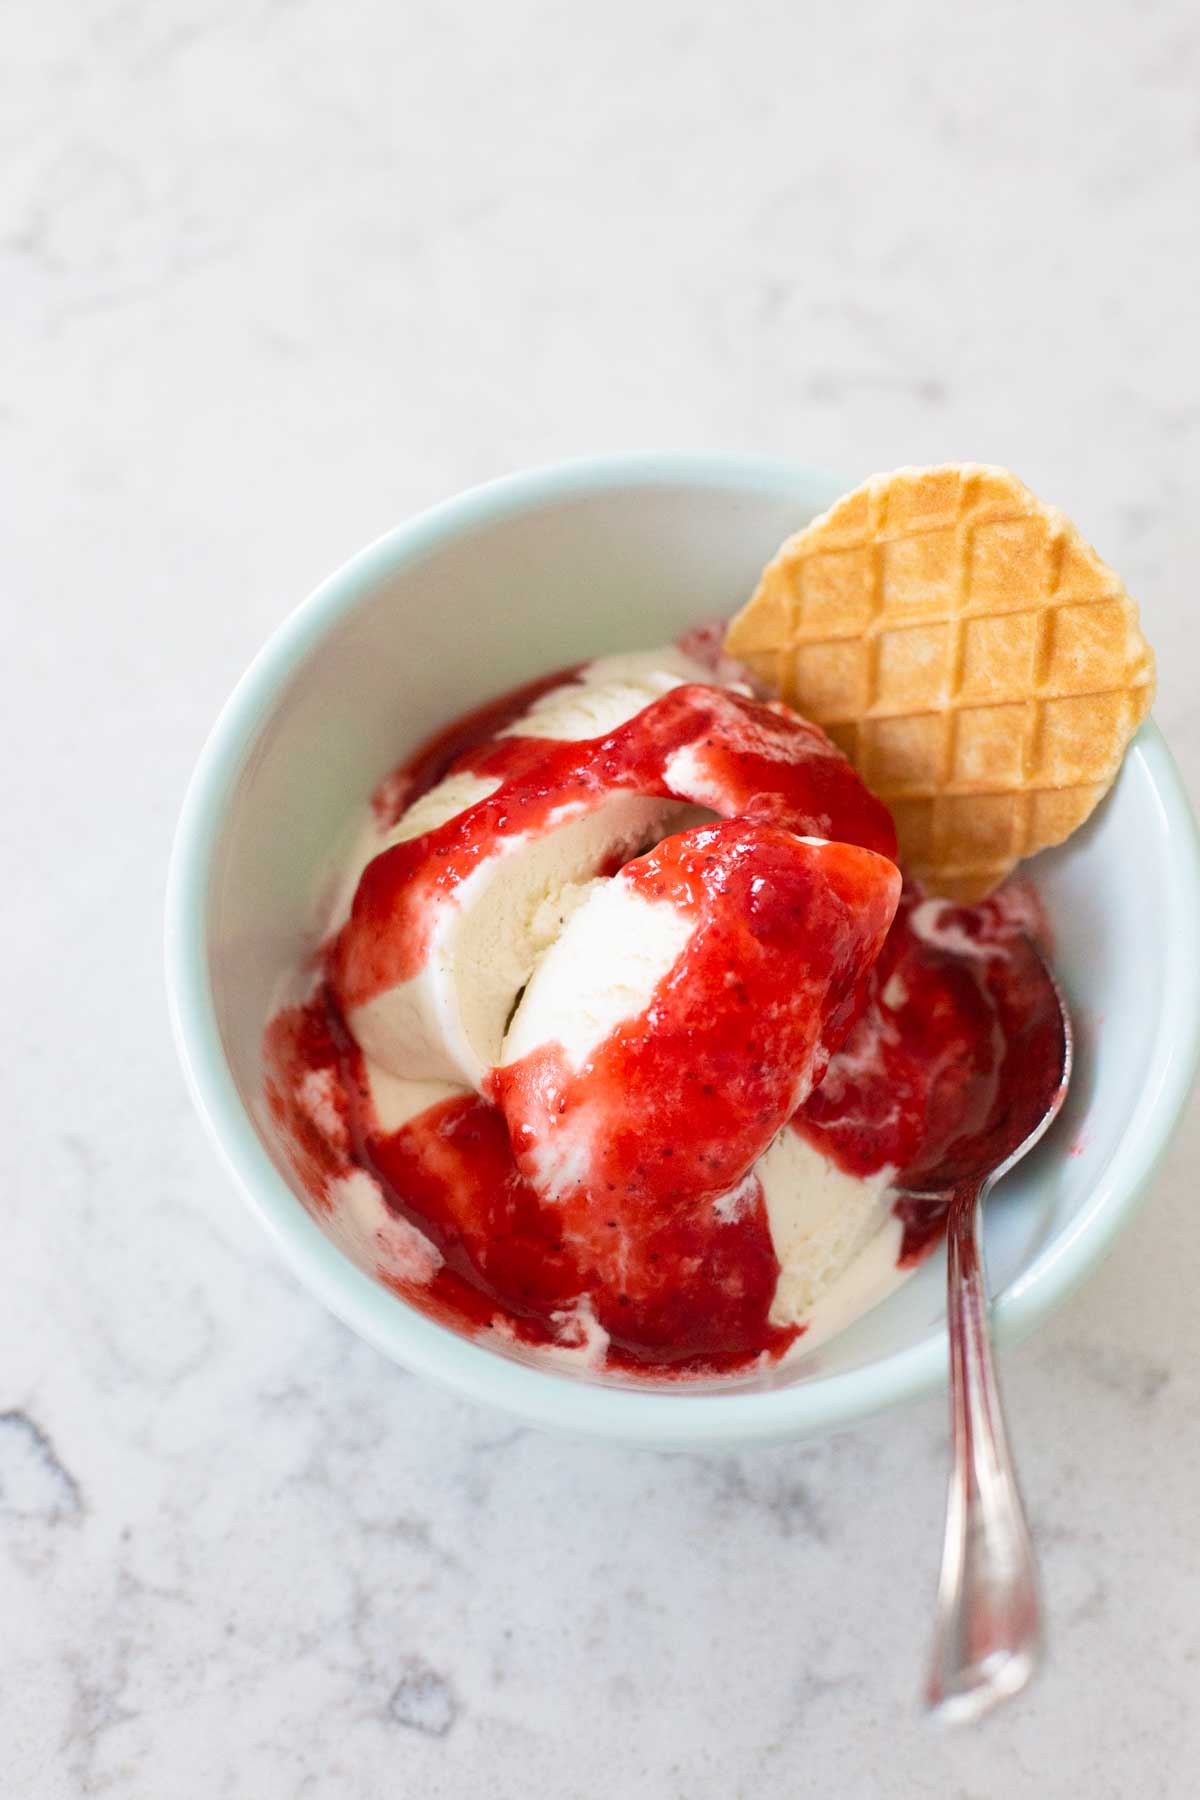 The strawberry sauce has been drizzled over vanilla ice cream and has a waffle cookie.